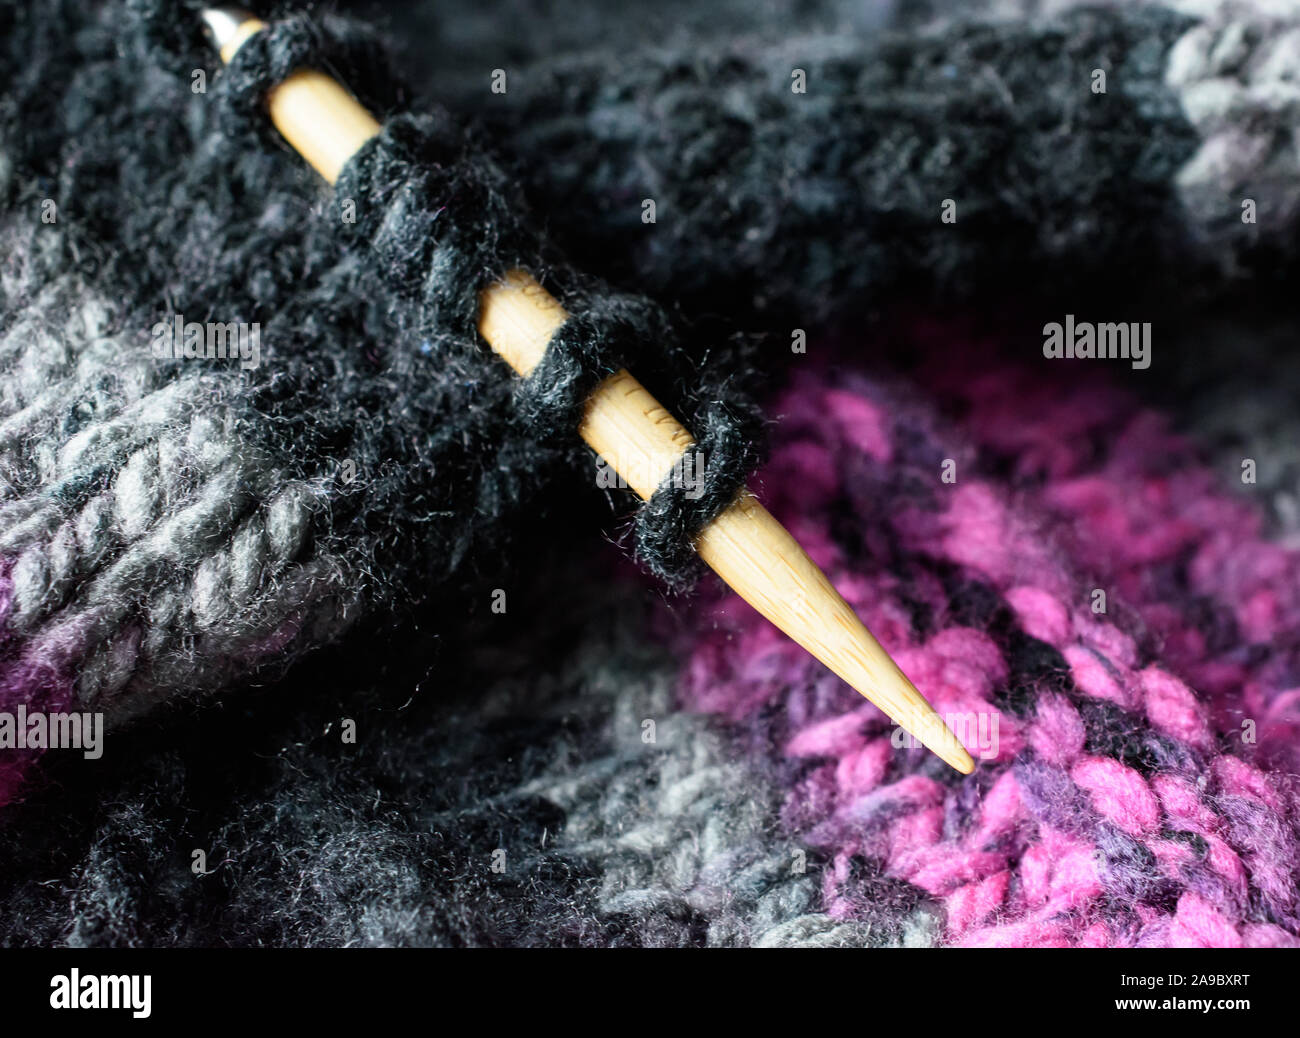 Closeup of Knitting Needle and Stitch Loops in Black Pink and Grey Variegated Wool Stock Photo